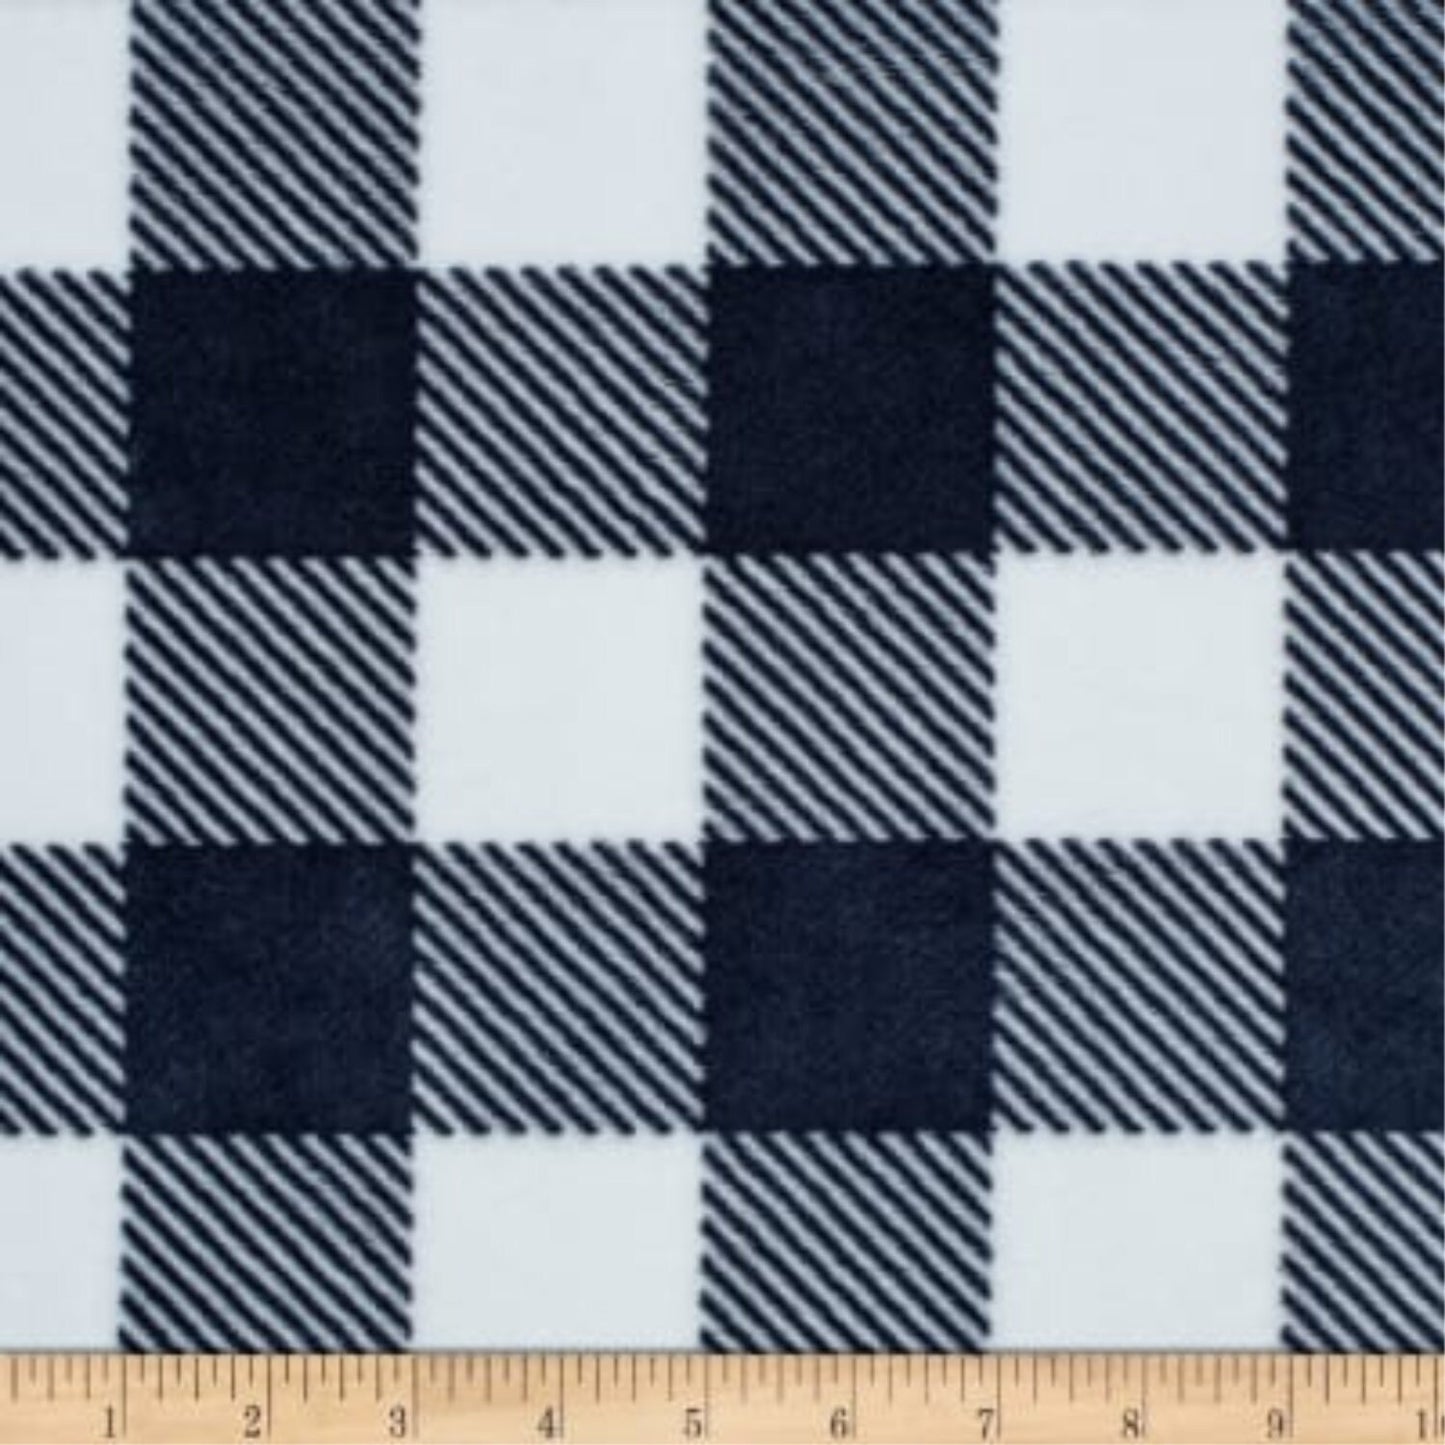 Personalized Baby Blanket, Buffalo Check Navy and White, Minky Baby Blanket, Baby Boy or Baby Girl Blanket,